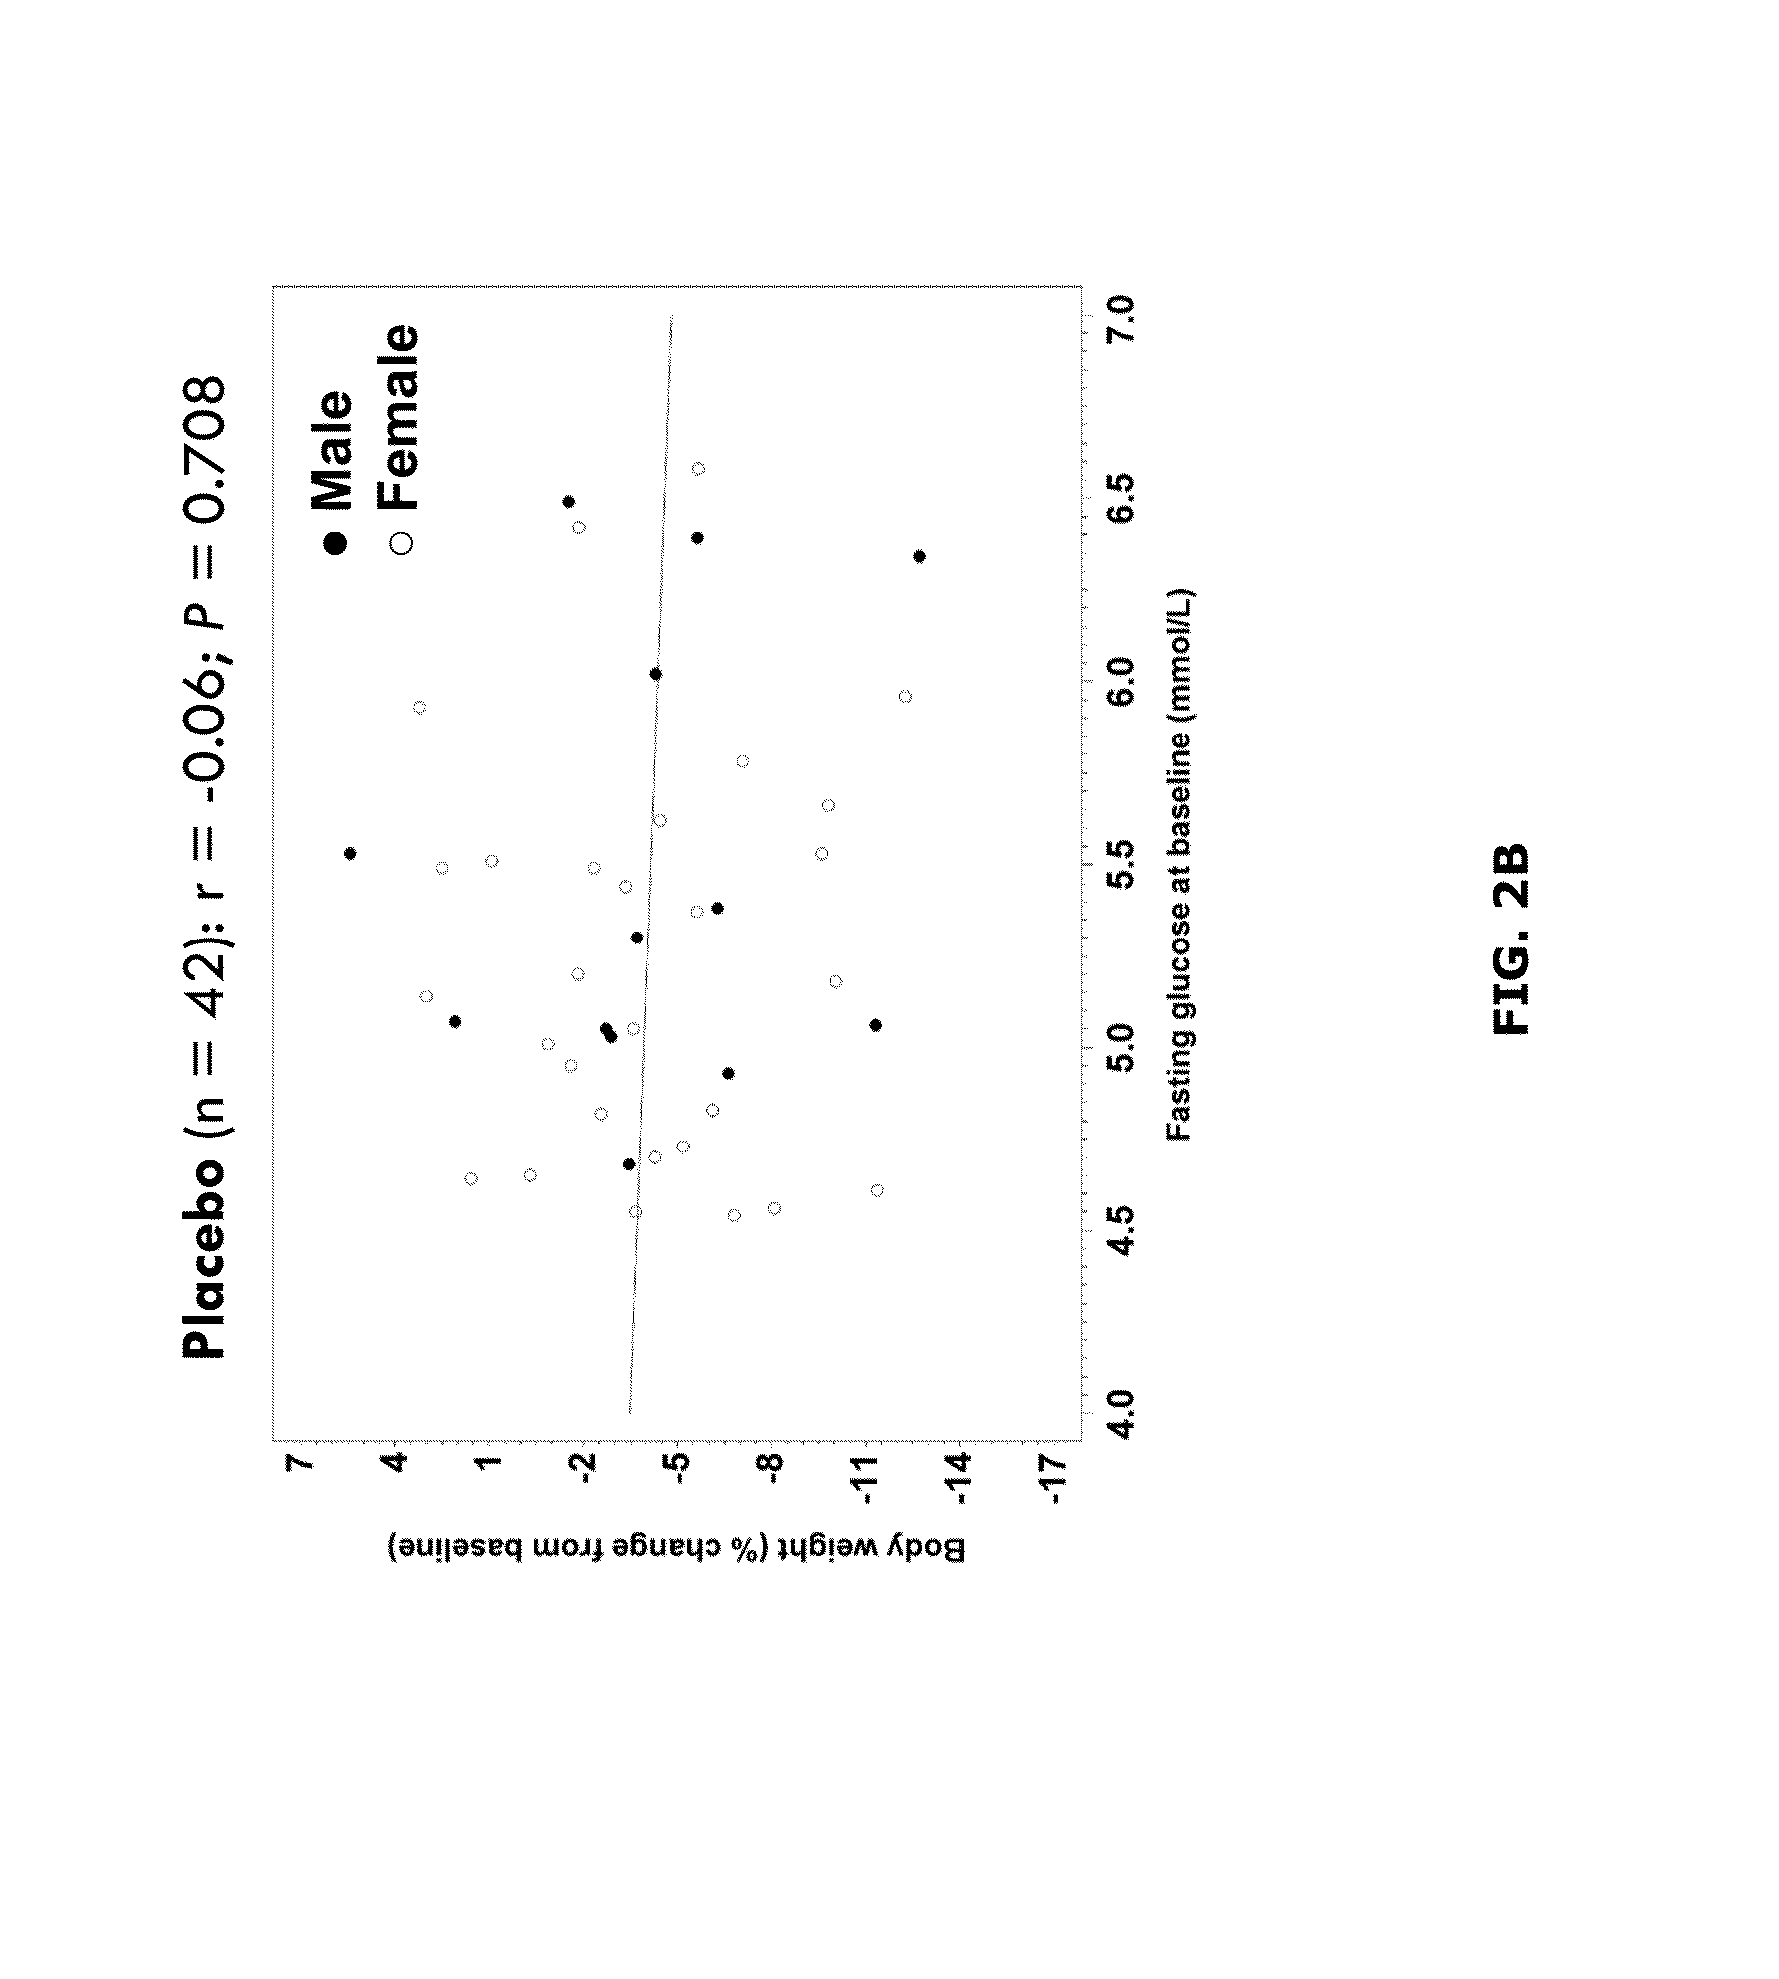 Methods for treating overweight or obesity